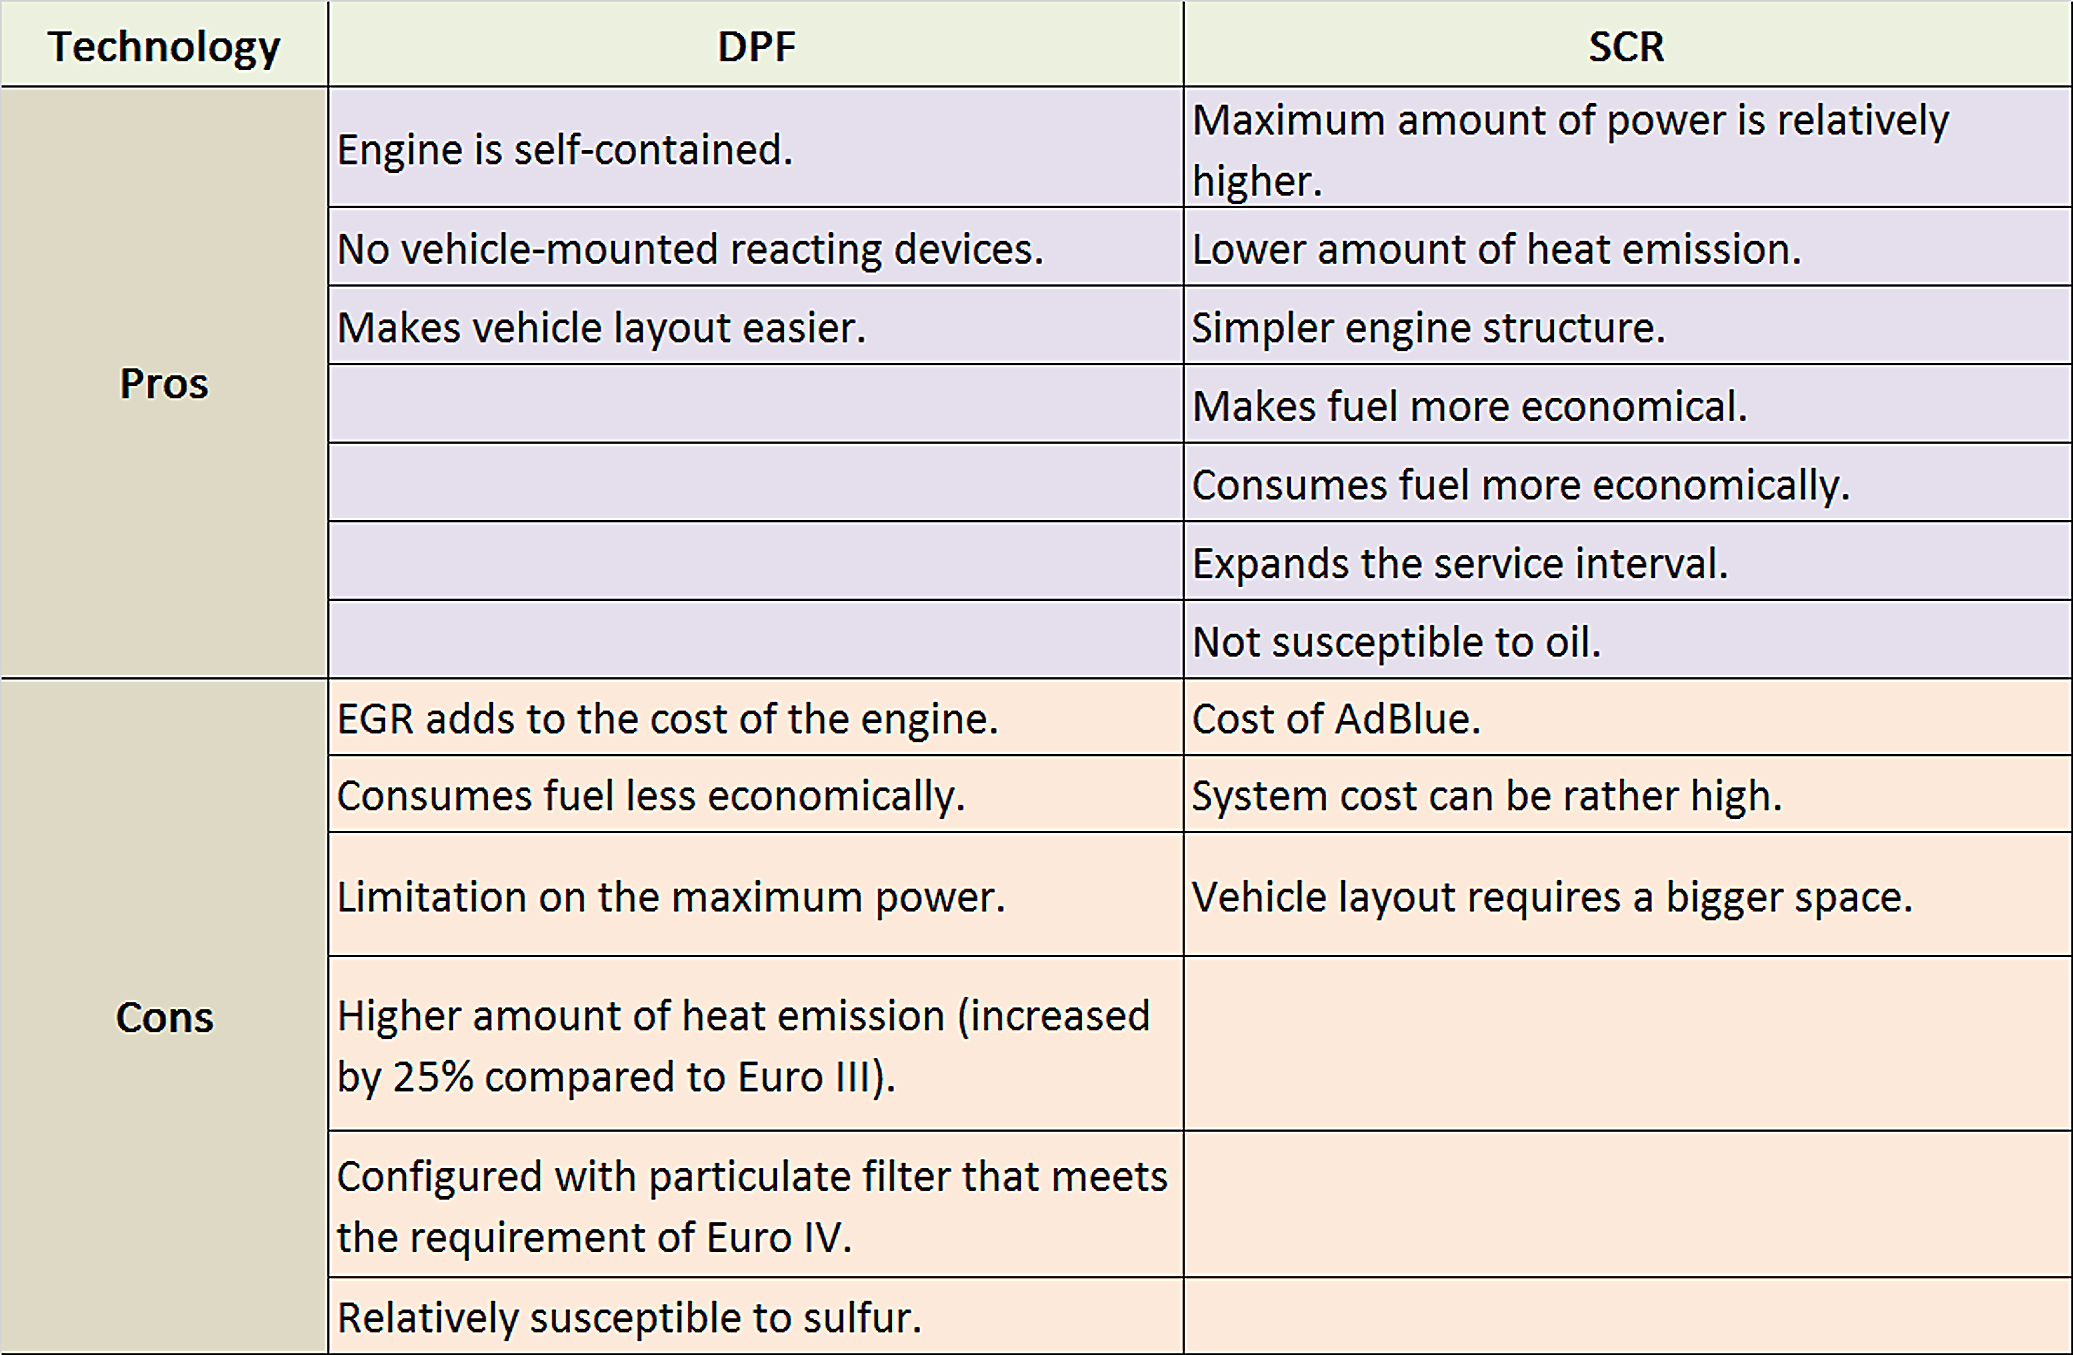 Comparsion between SCR and DPF